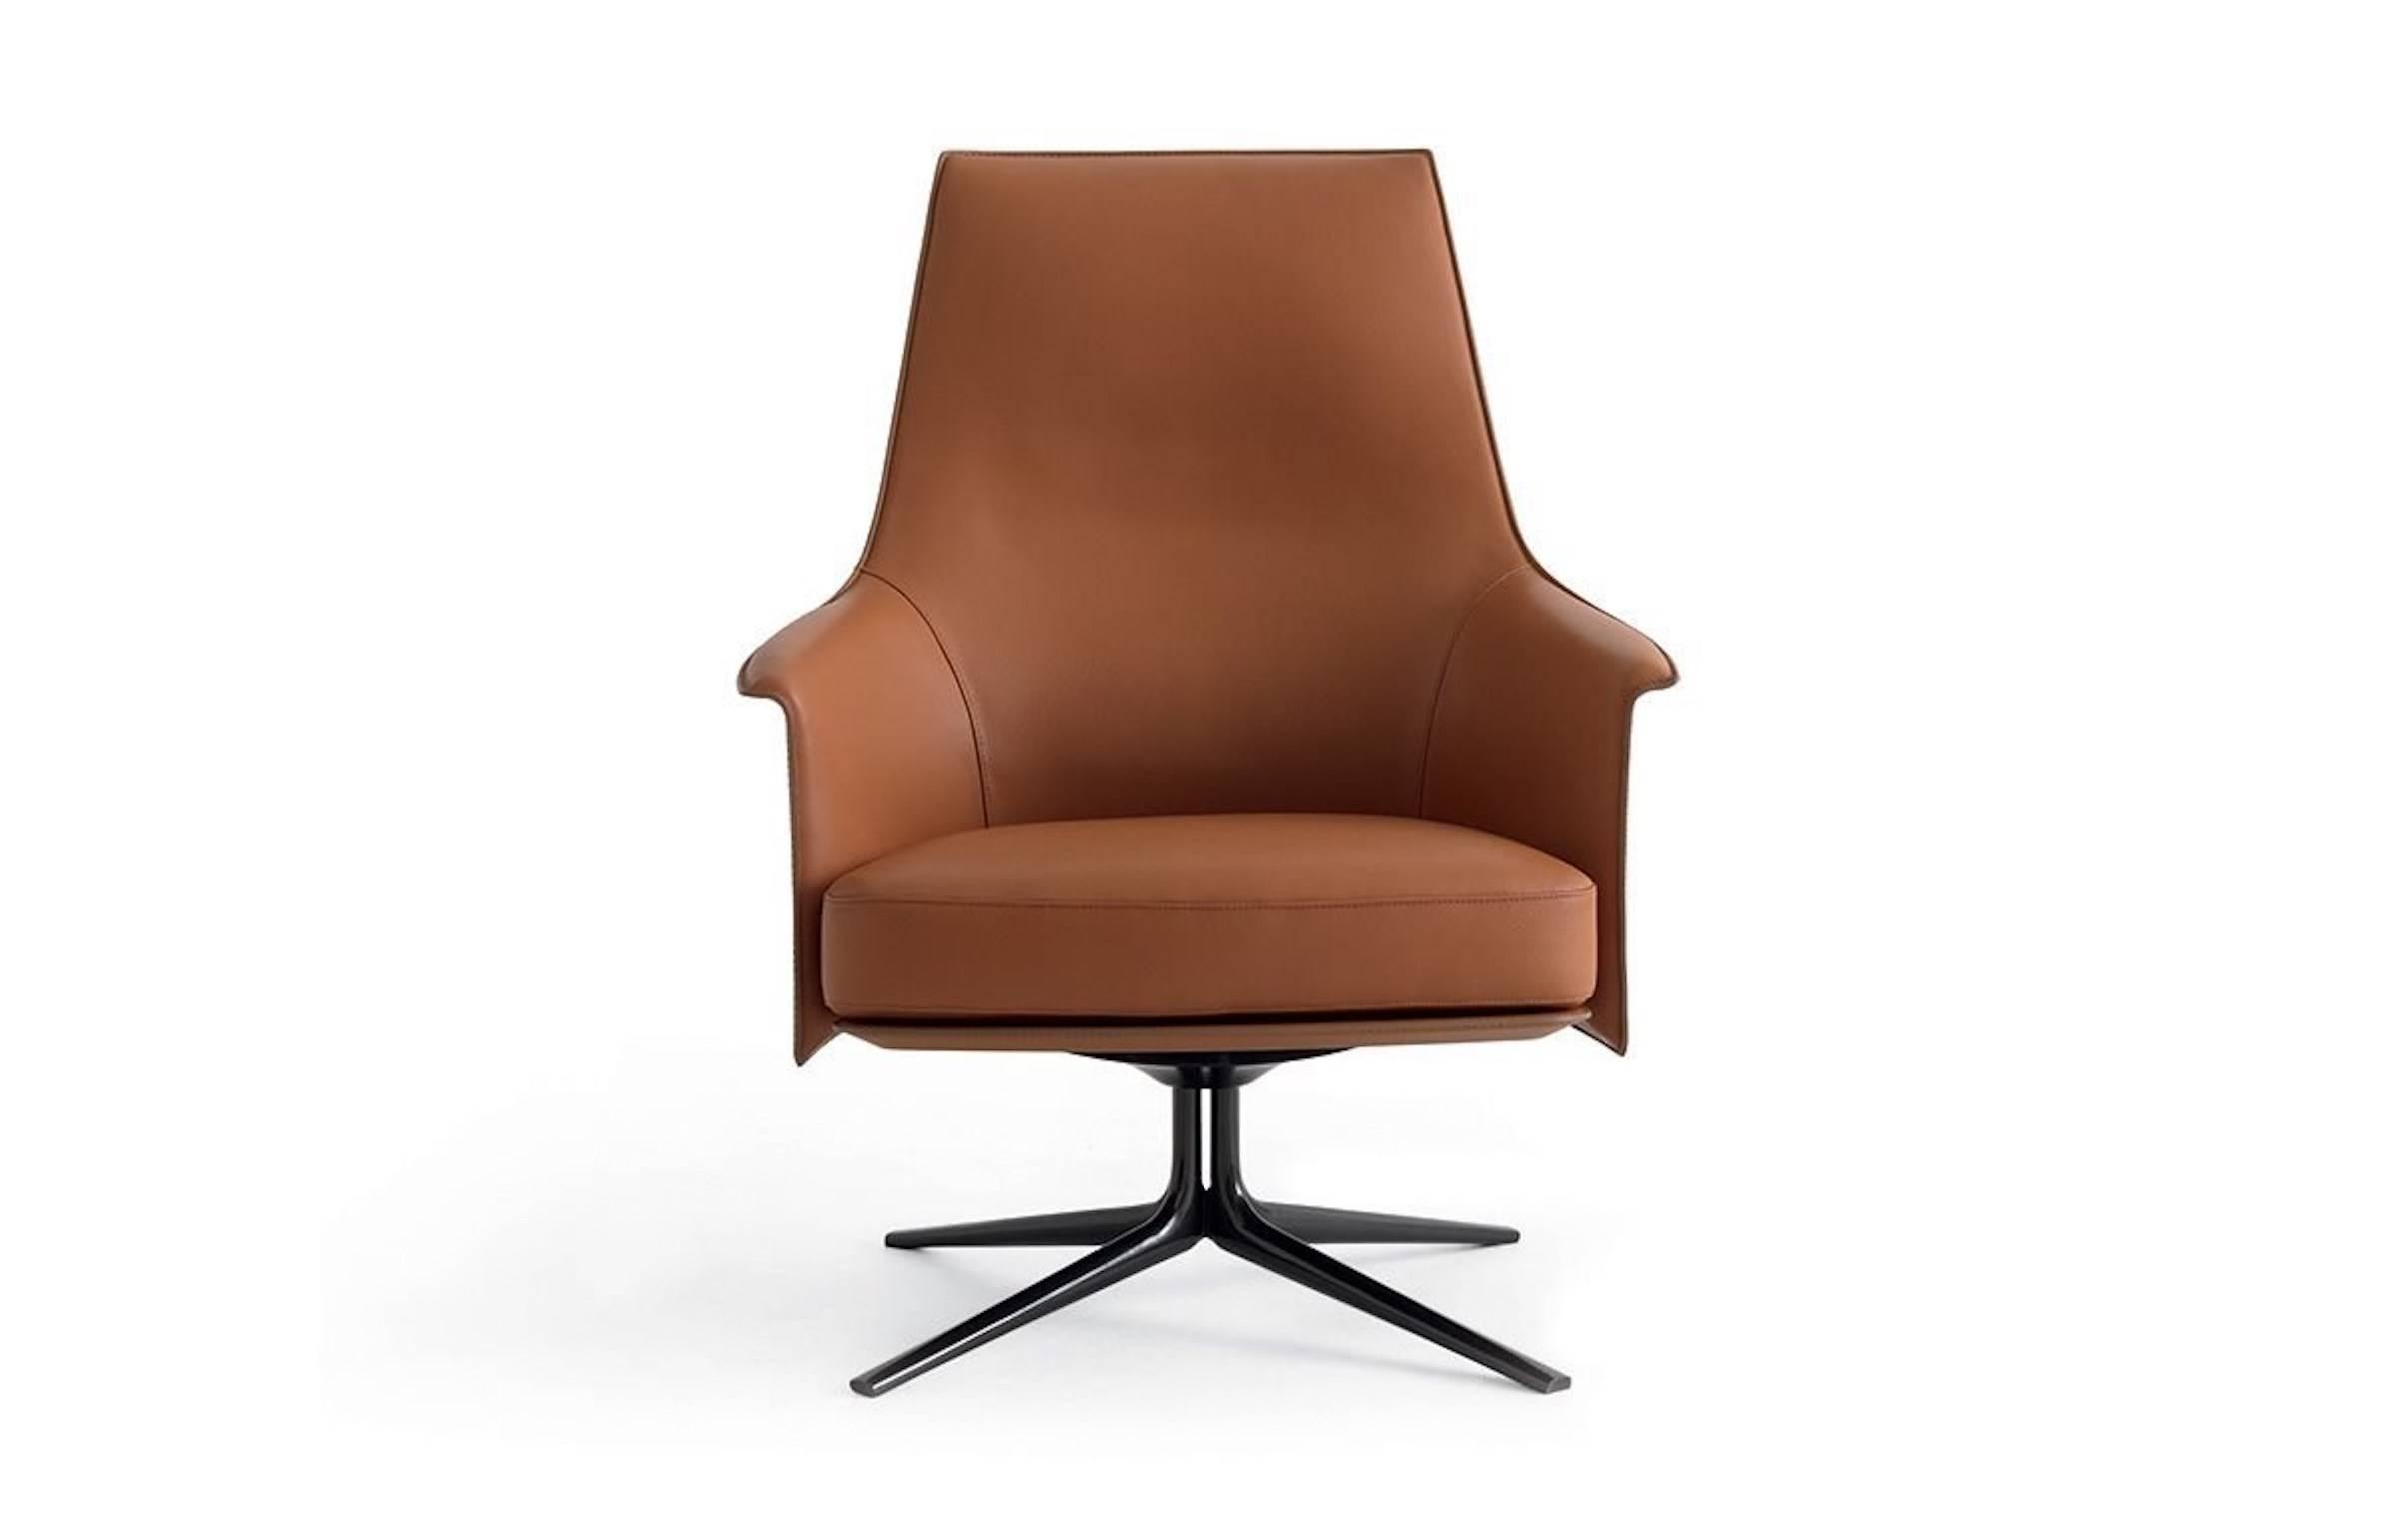 The natural elegance of Stanford stems from the lightness of its design: a thin, enveloping shell, like a dress on a slender frame of die-cast aluminium.

Frame in compact polyurethane, with flexible polyurethane internal insert
Seat cushion in